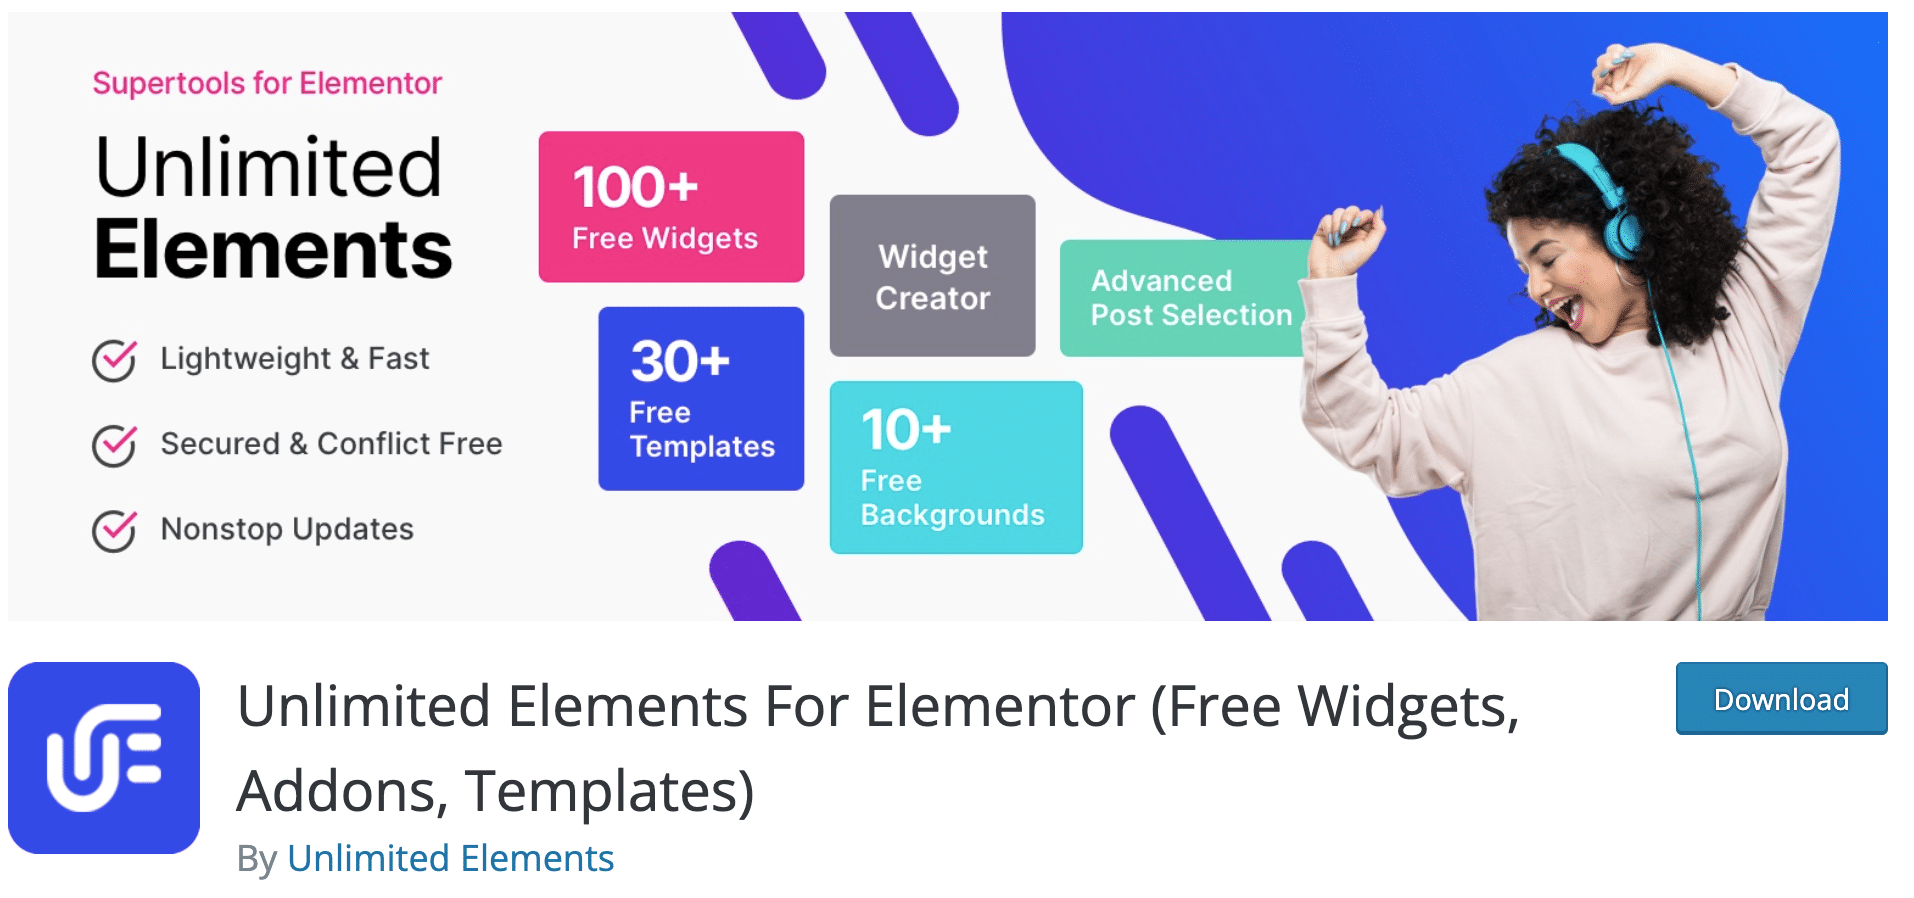 Unlimited Elements offers widgets, templates and addons for Elementor.